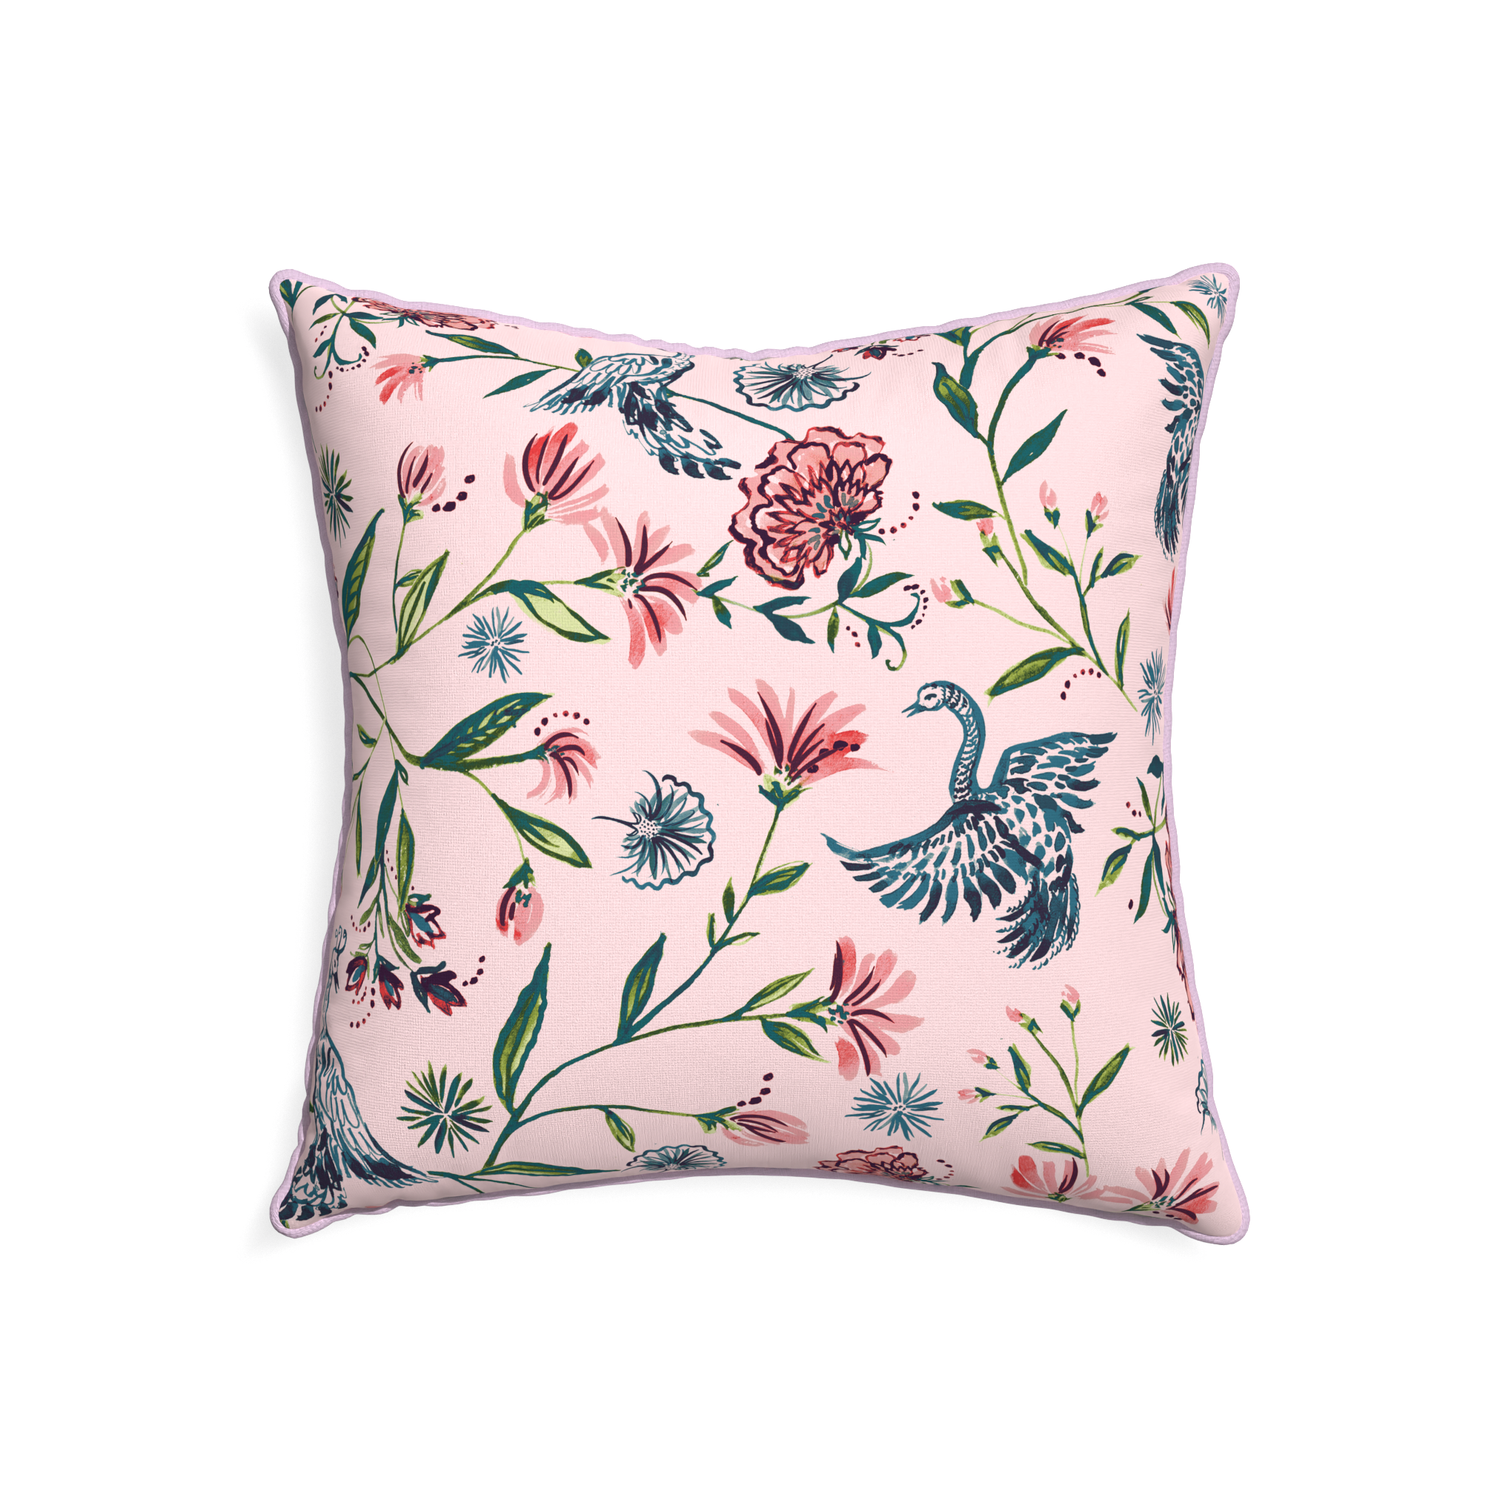 22-square daphne rose custom pillow with l piping on white background